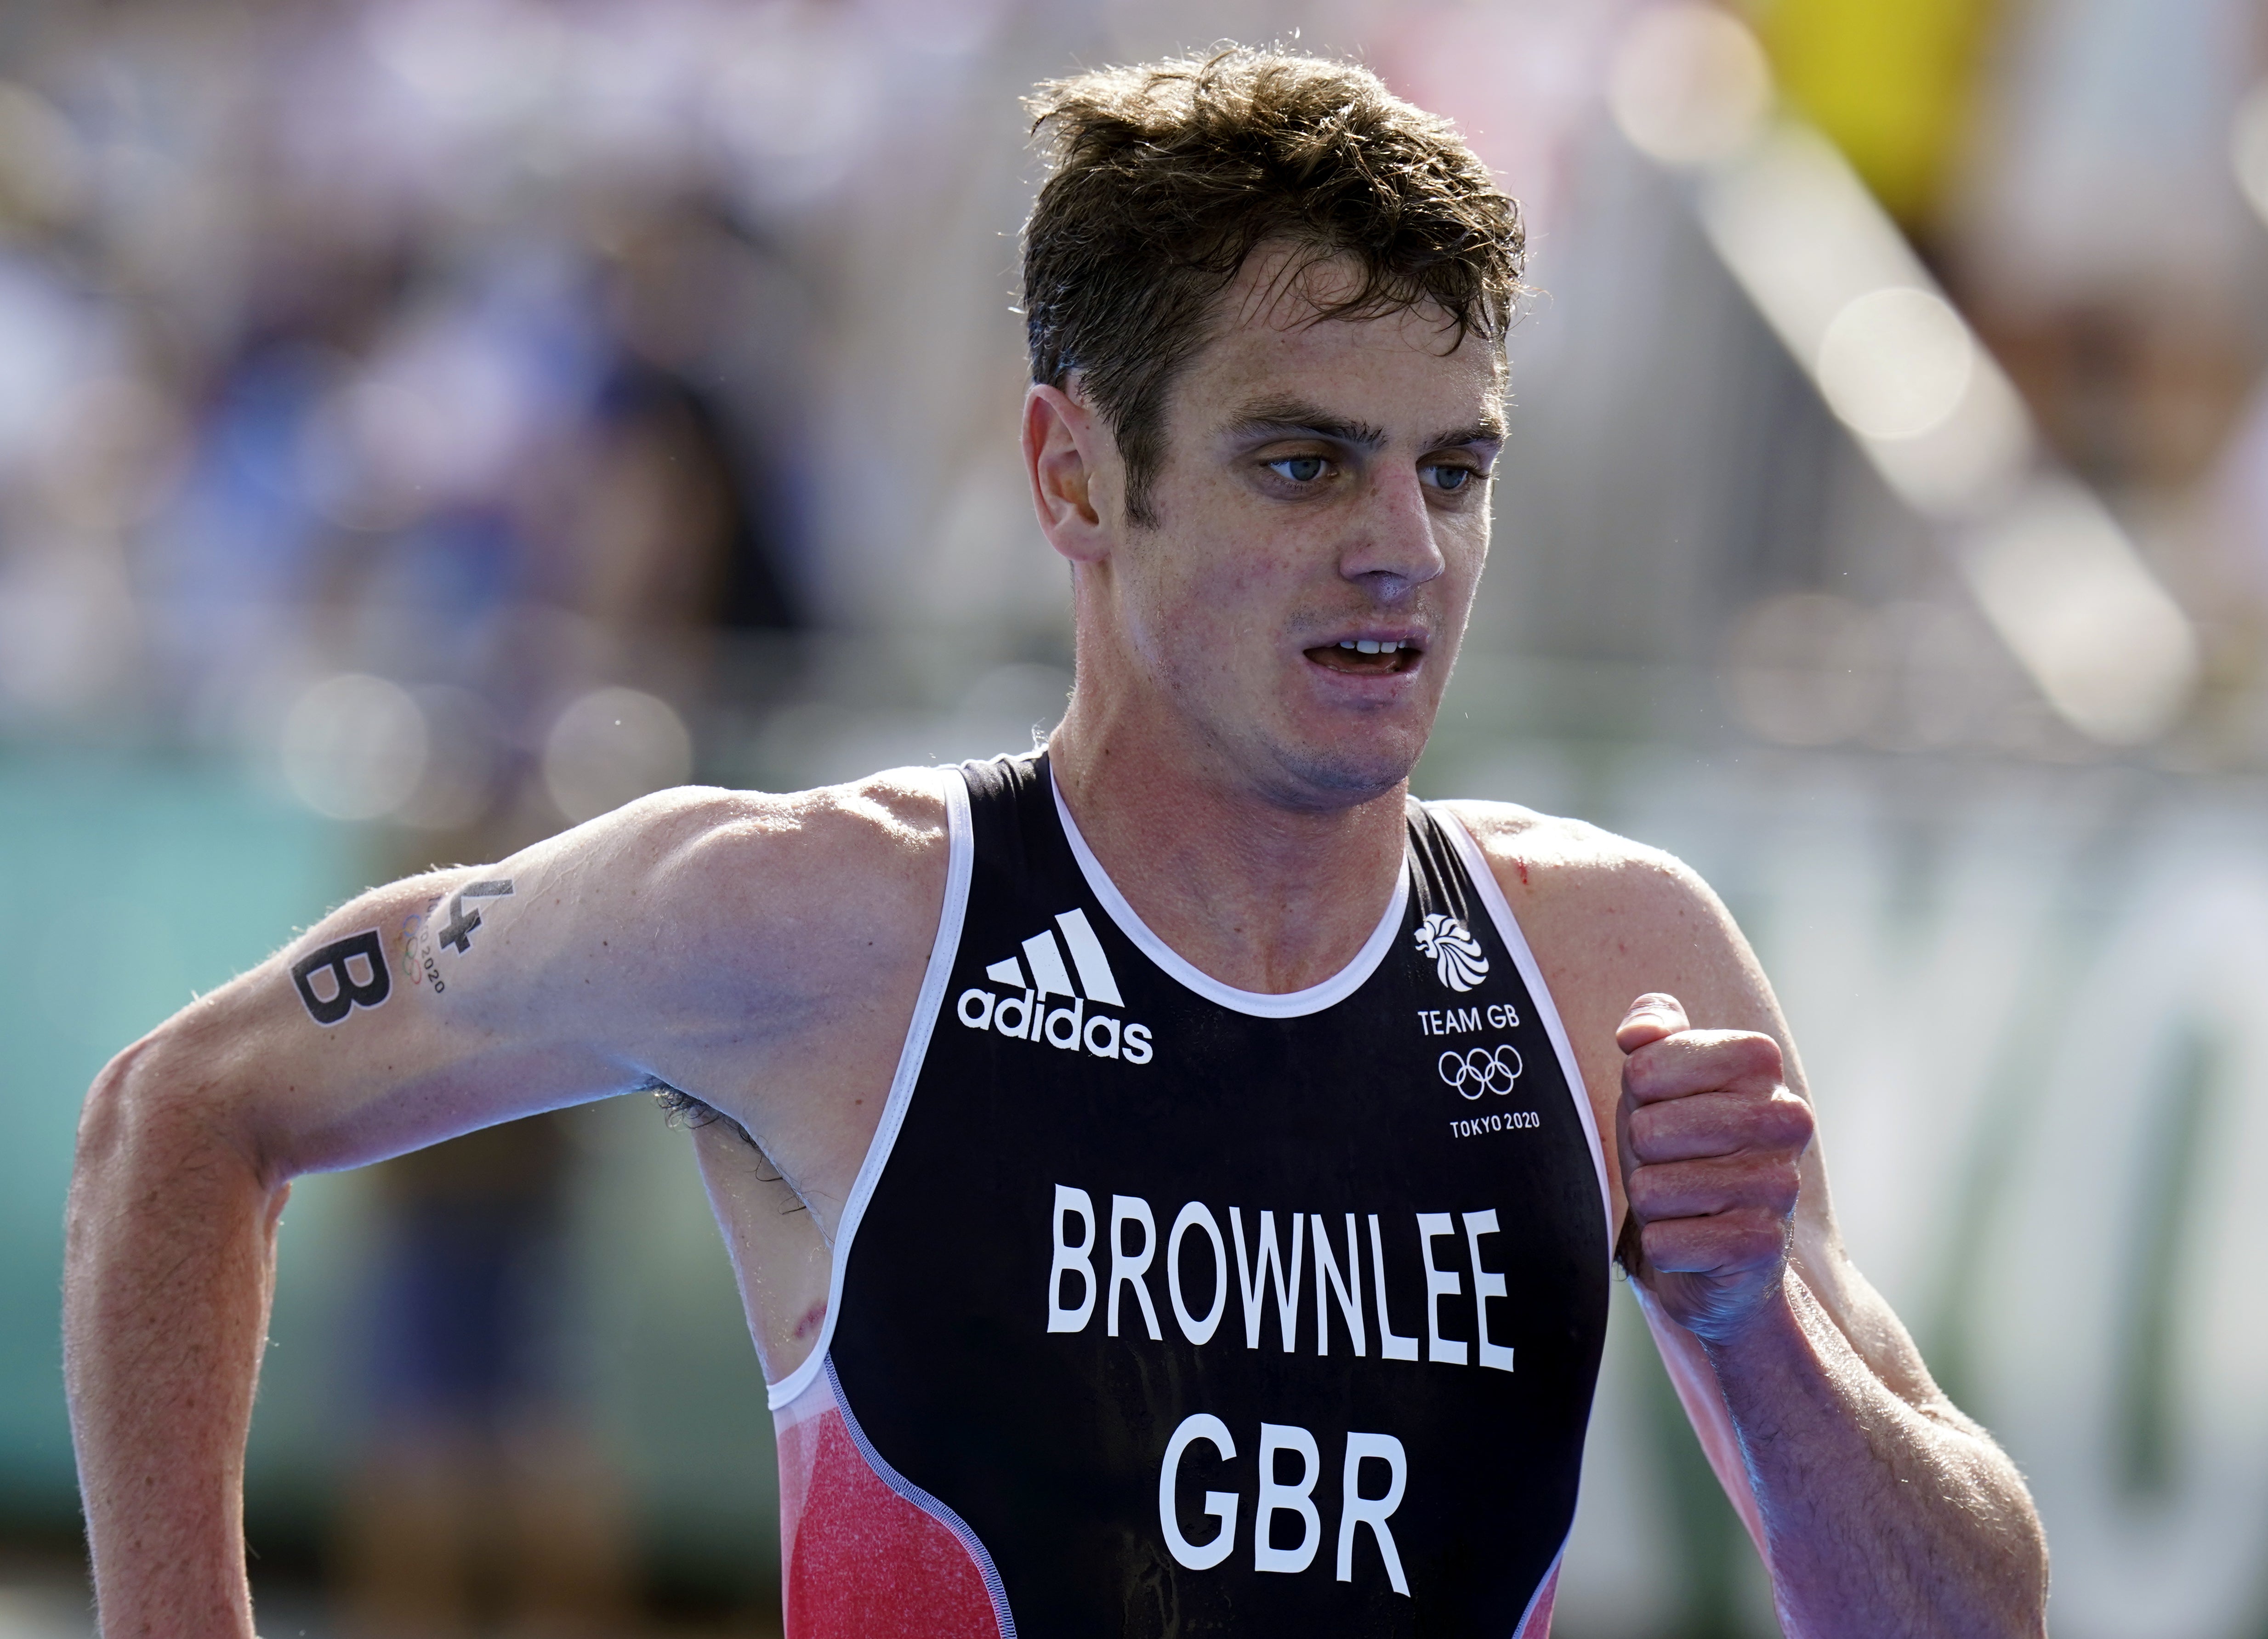 Jonny Brownlee has returned after a broken elbow and fractured wrist. (Danny Lawson/PA)